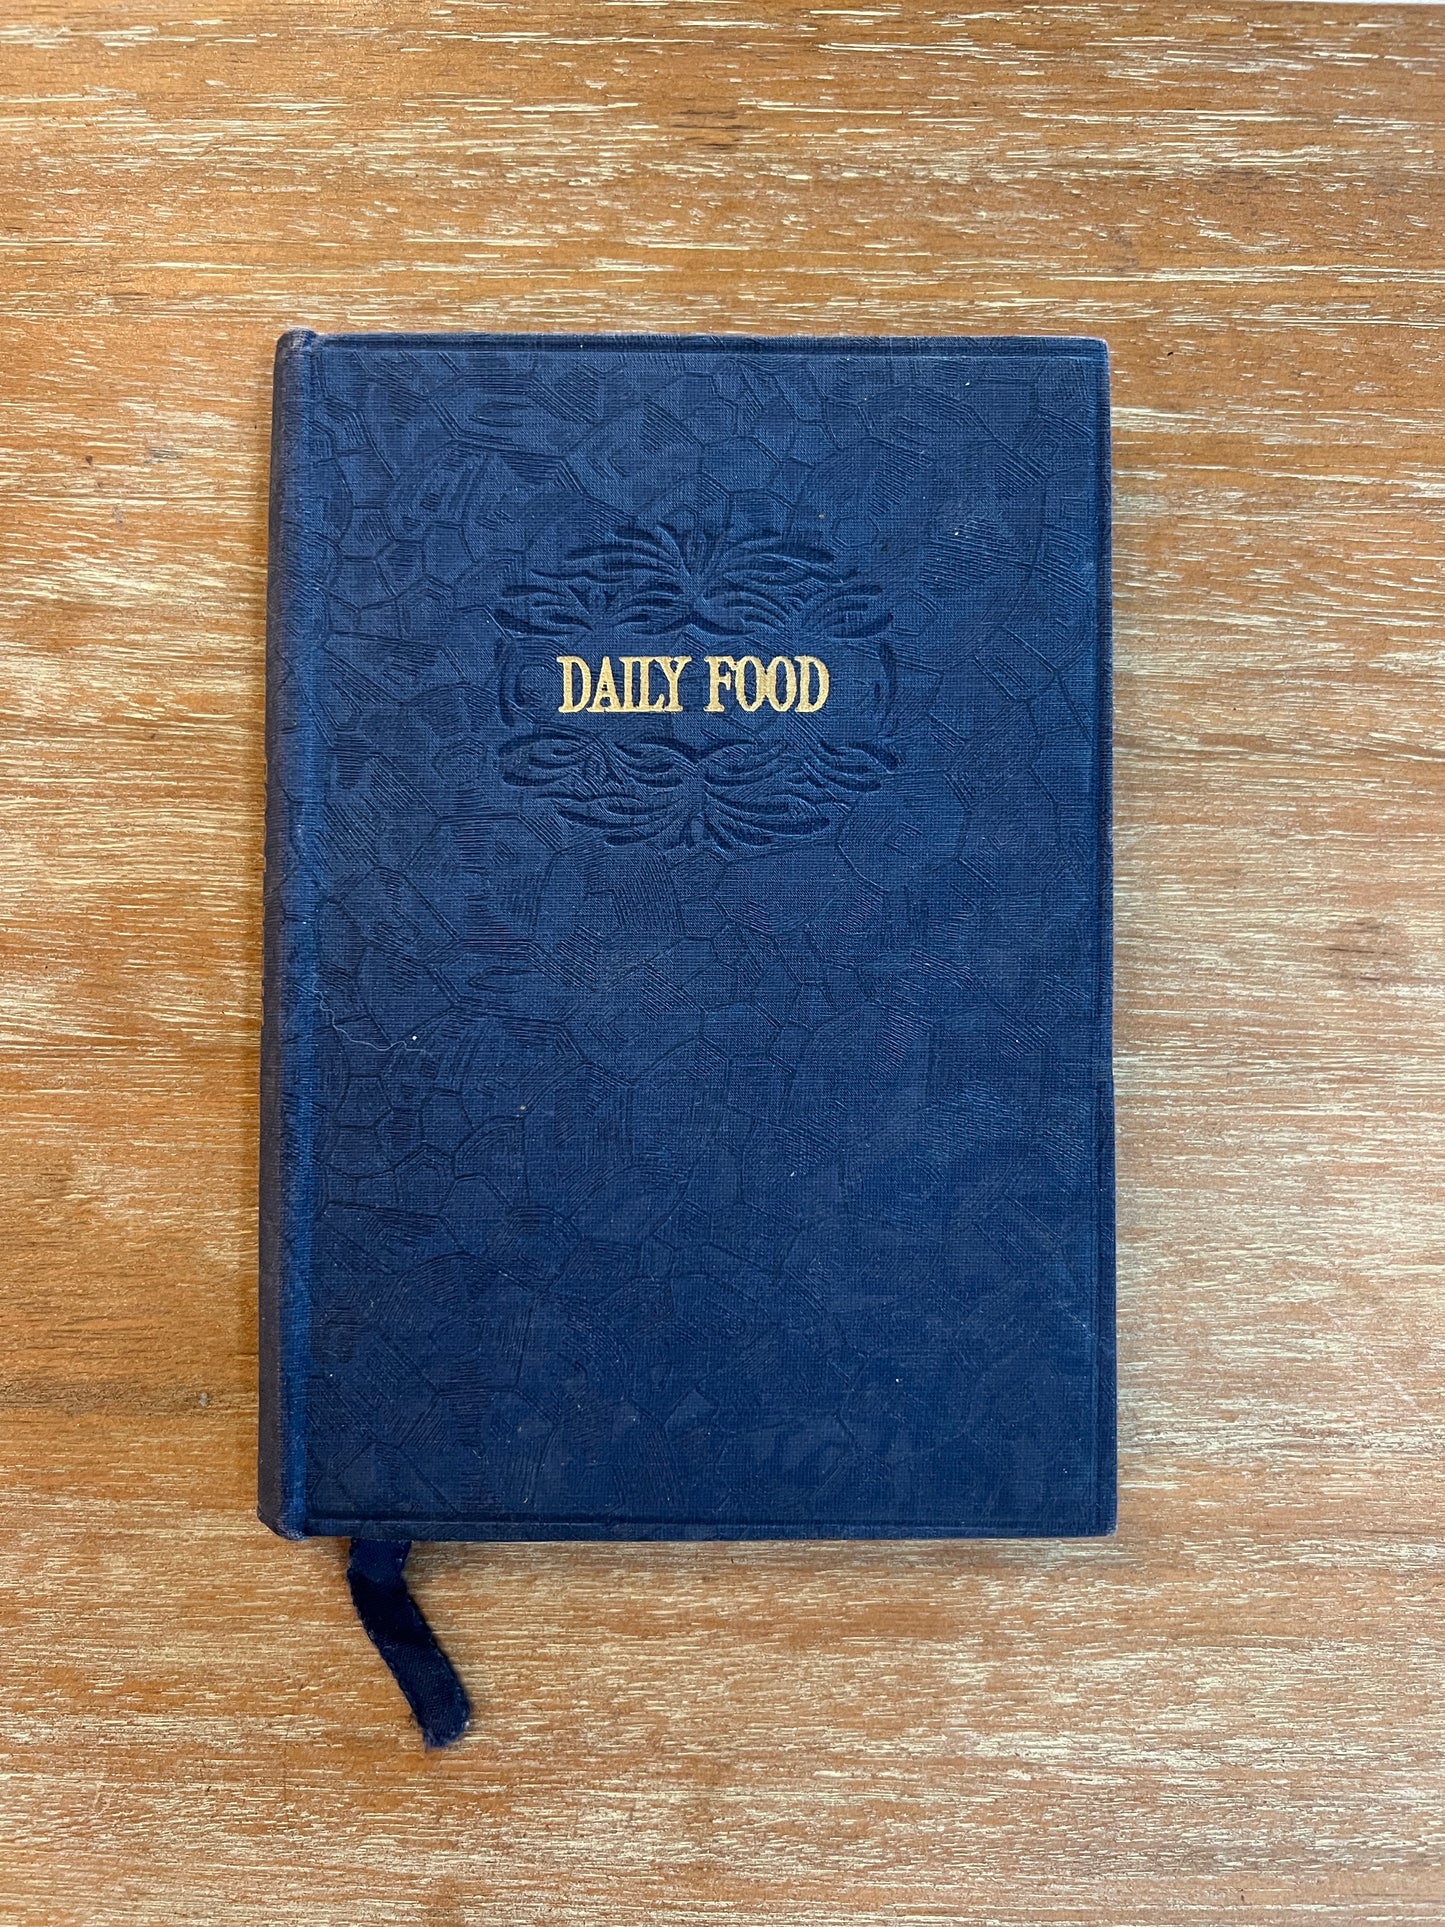 Daily Food Vintage book- 1930's